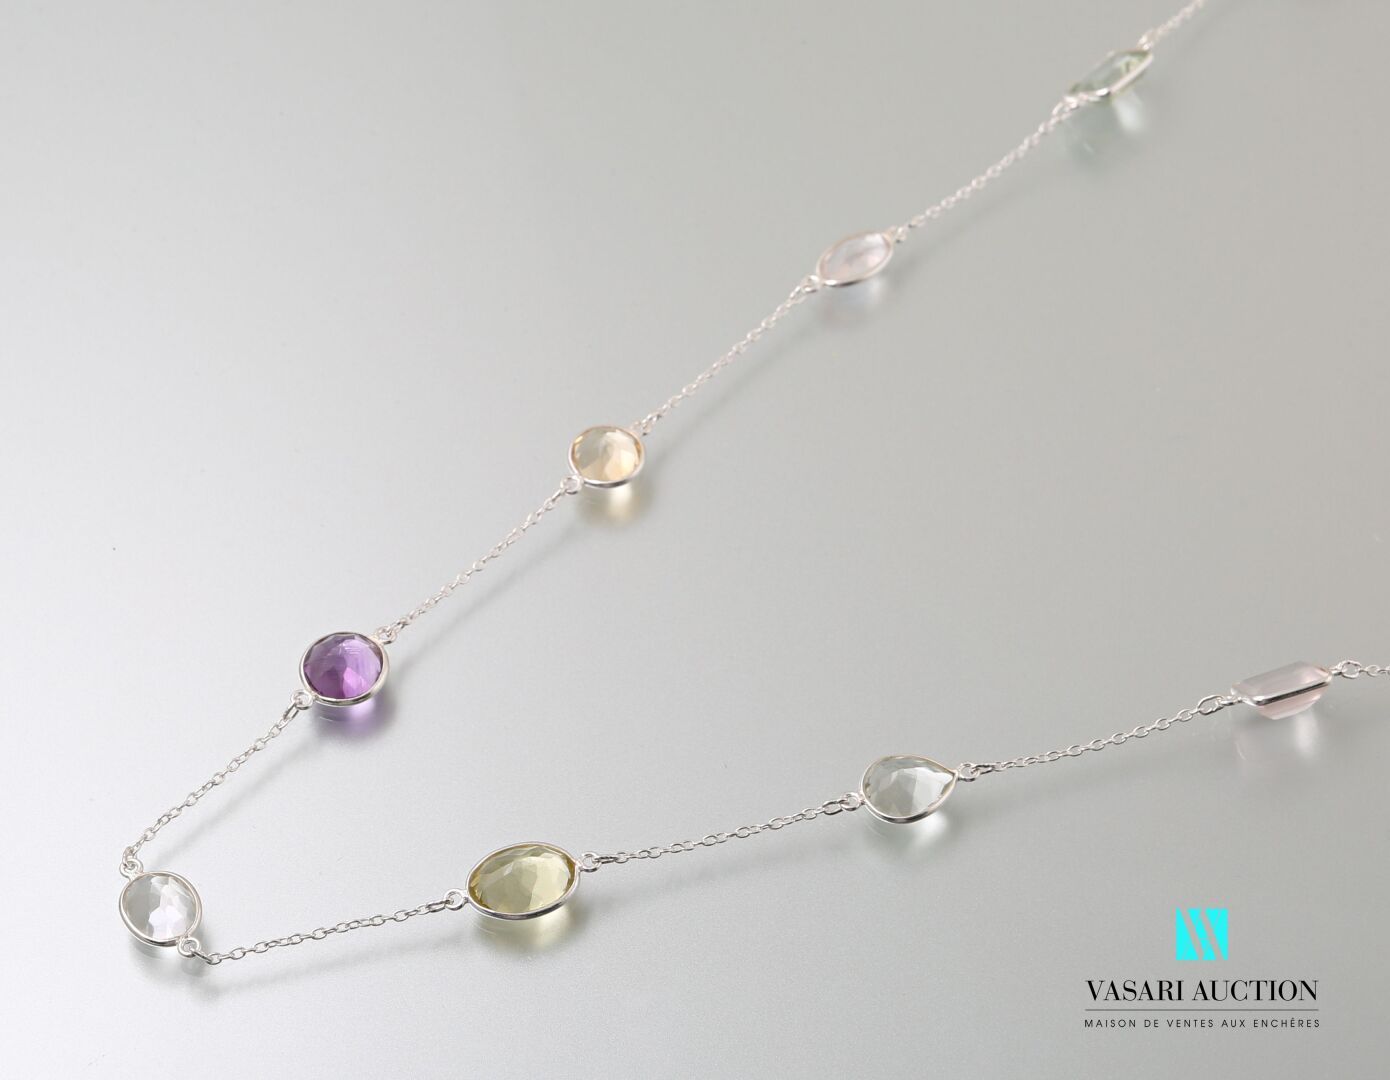 Null Silver long necklace with faceted multicolored stones, the lobster clasp.

&hellip;